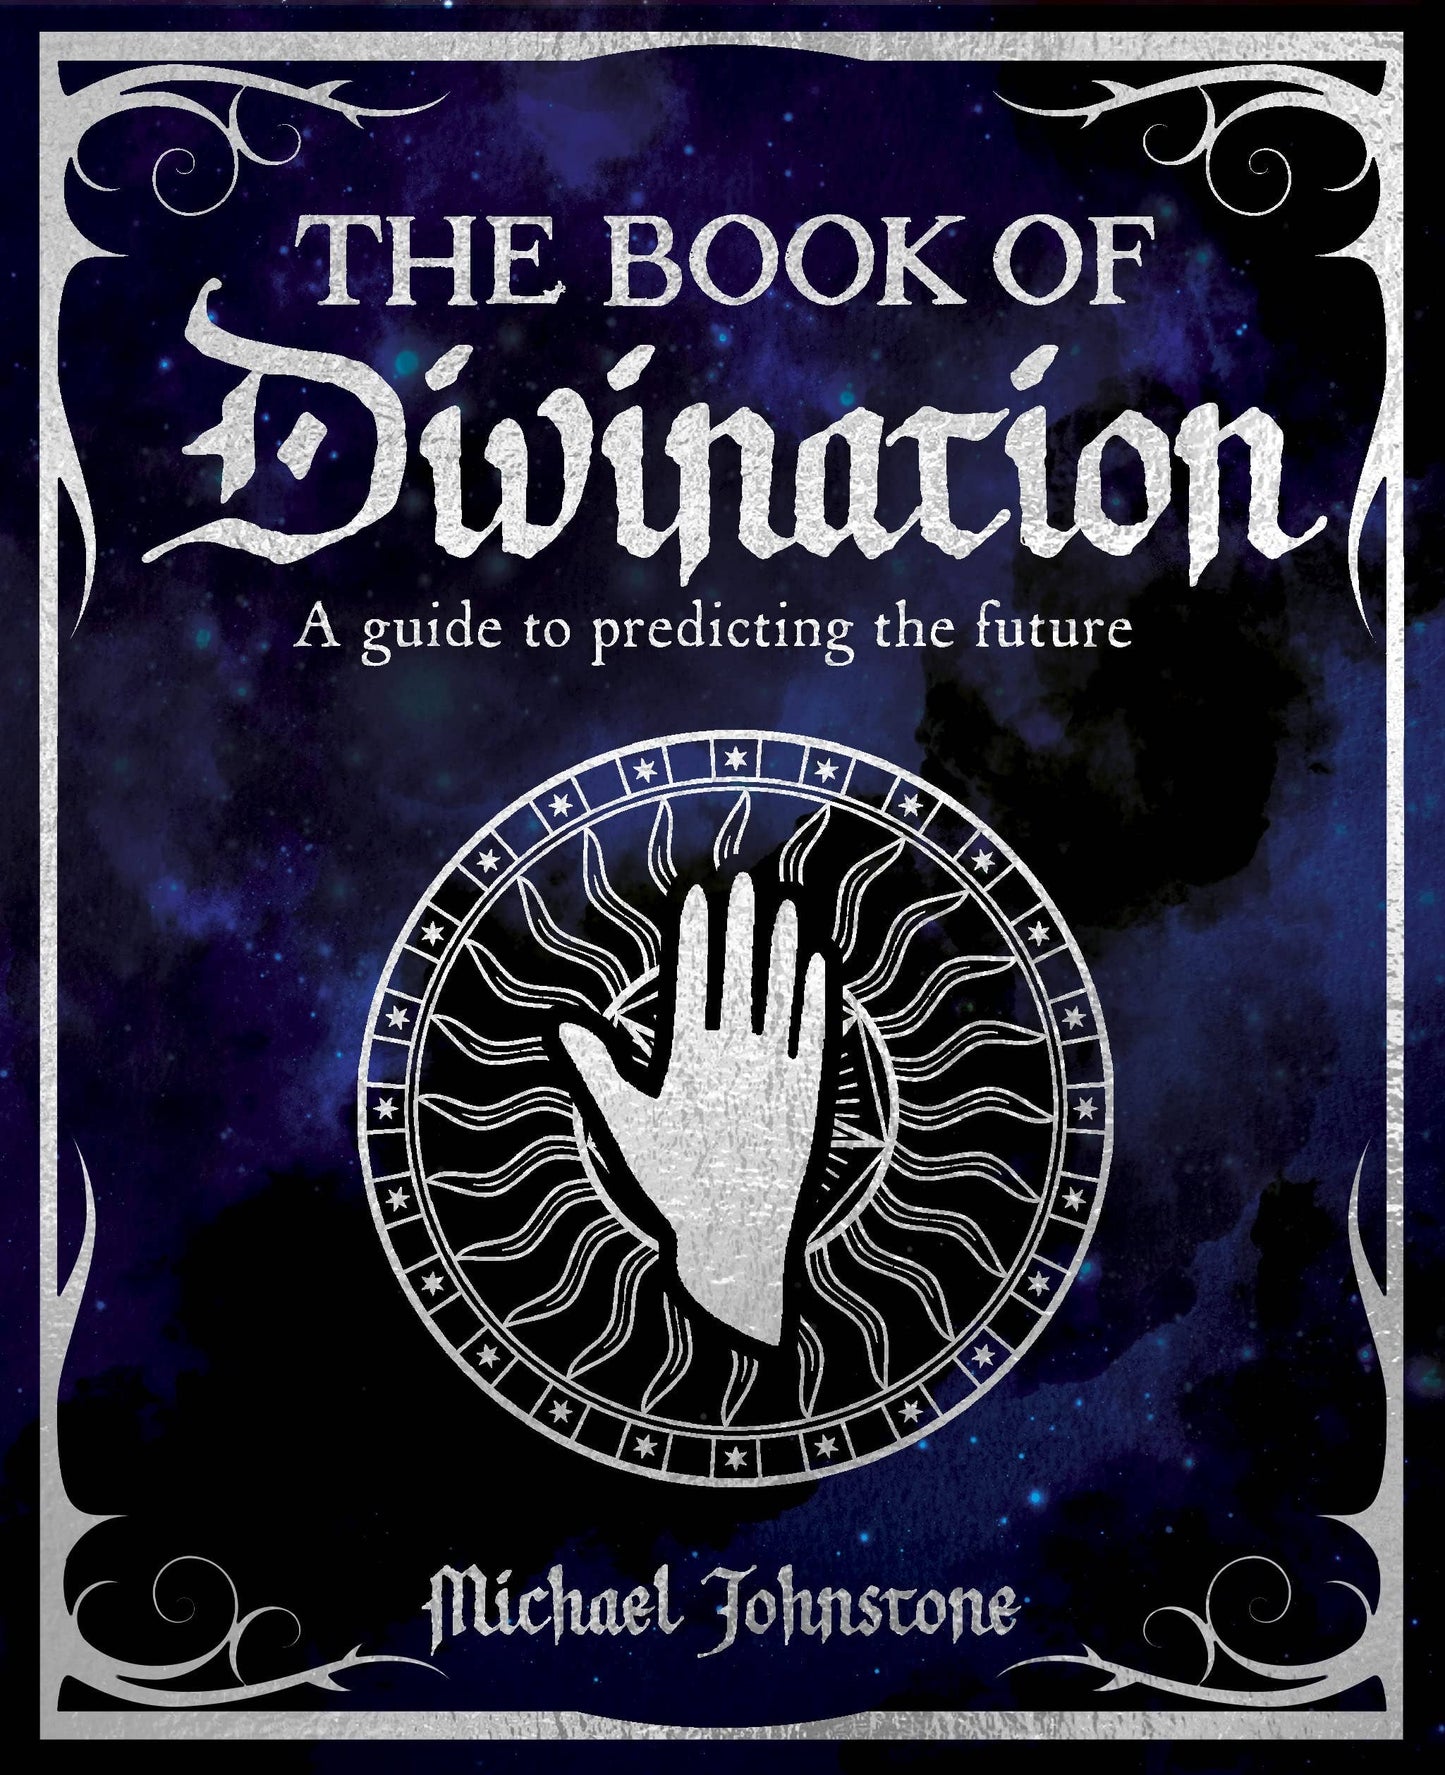 Book Of Divination: A Guide to Predicting the Future